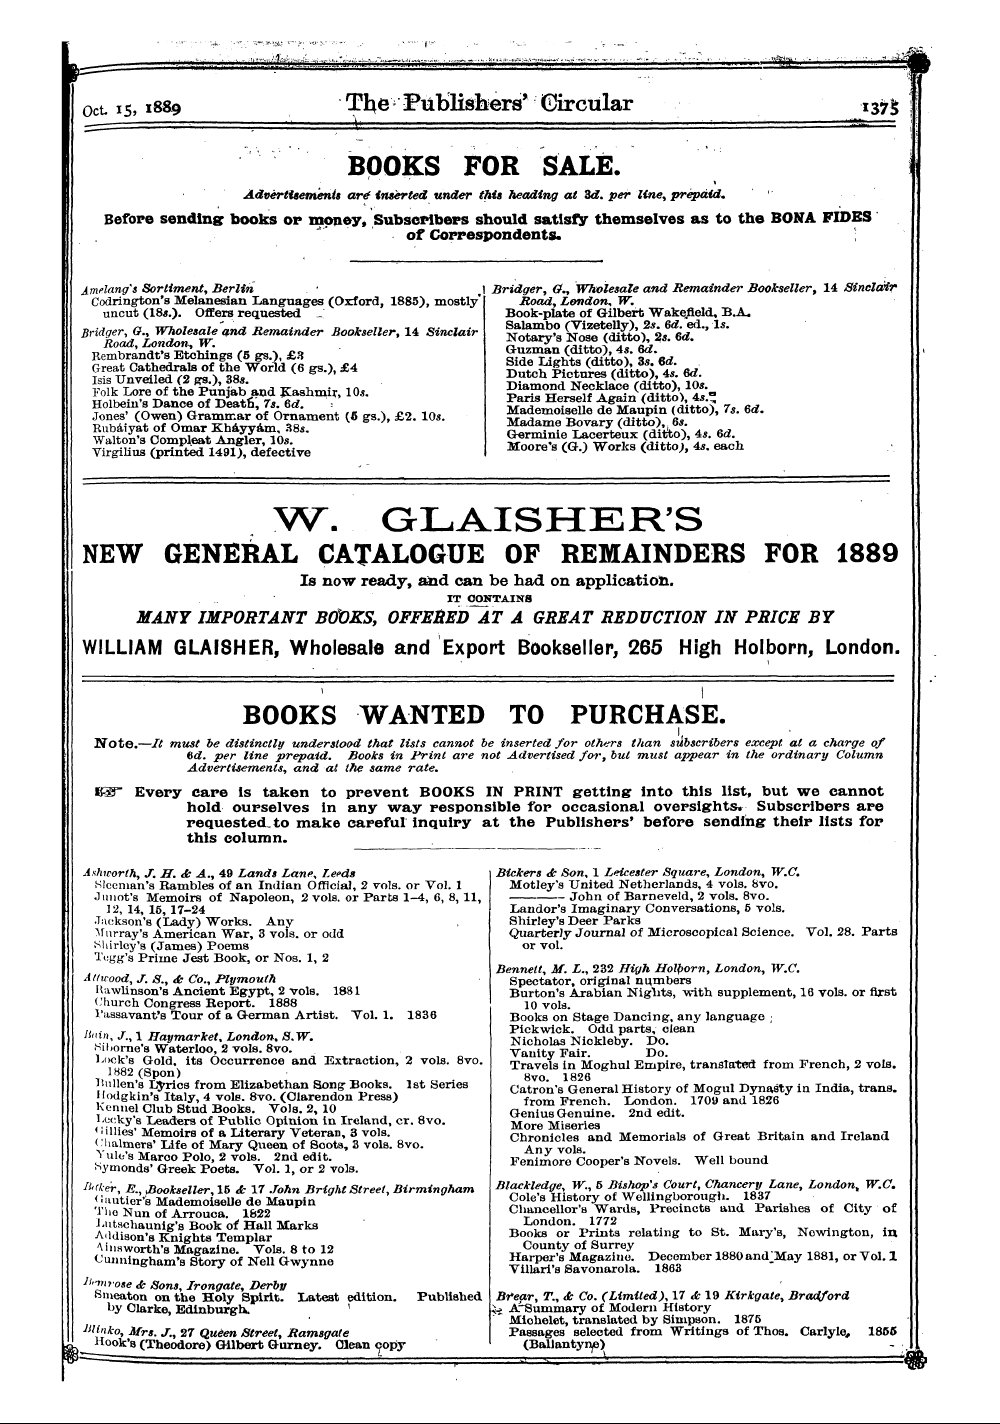 Publishers’ Circular (1880-1890): jS F Y, 1st edition - Books For Sale. I